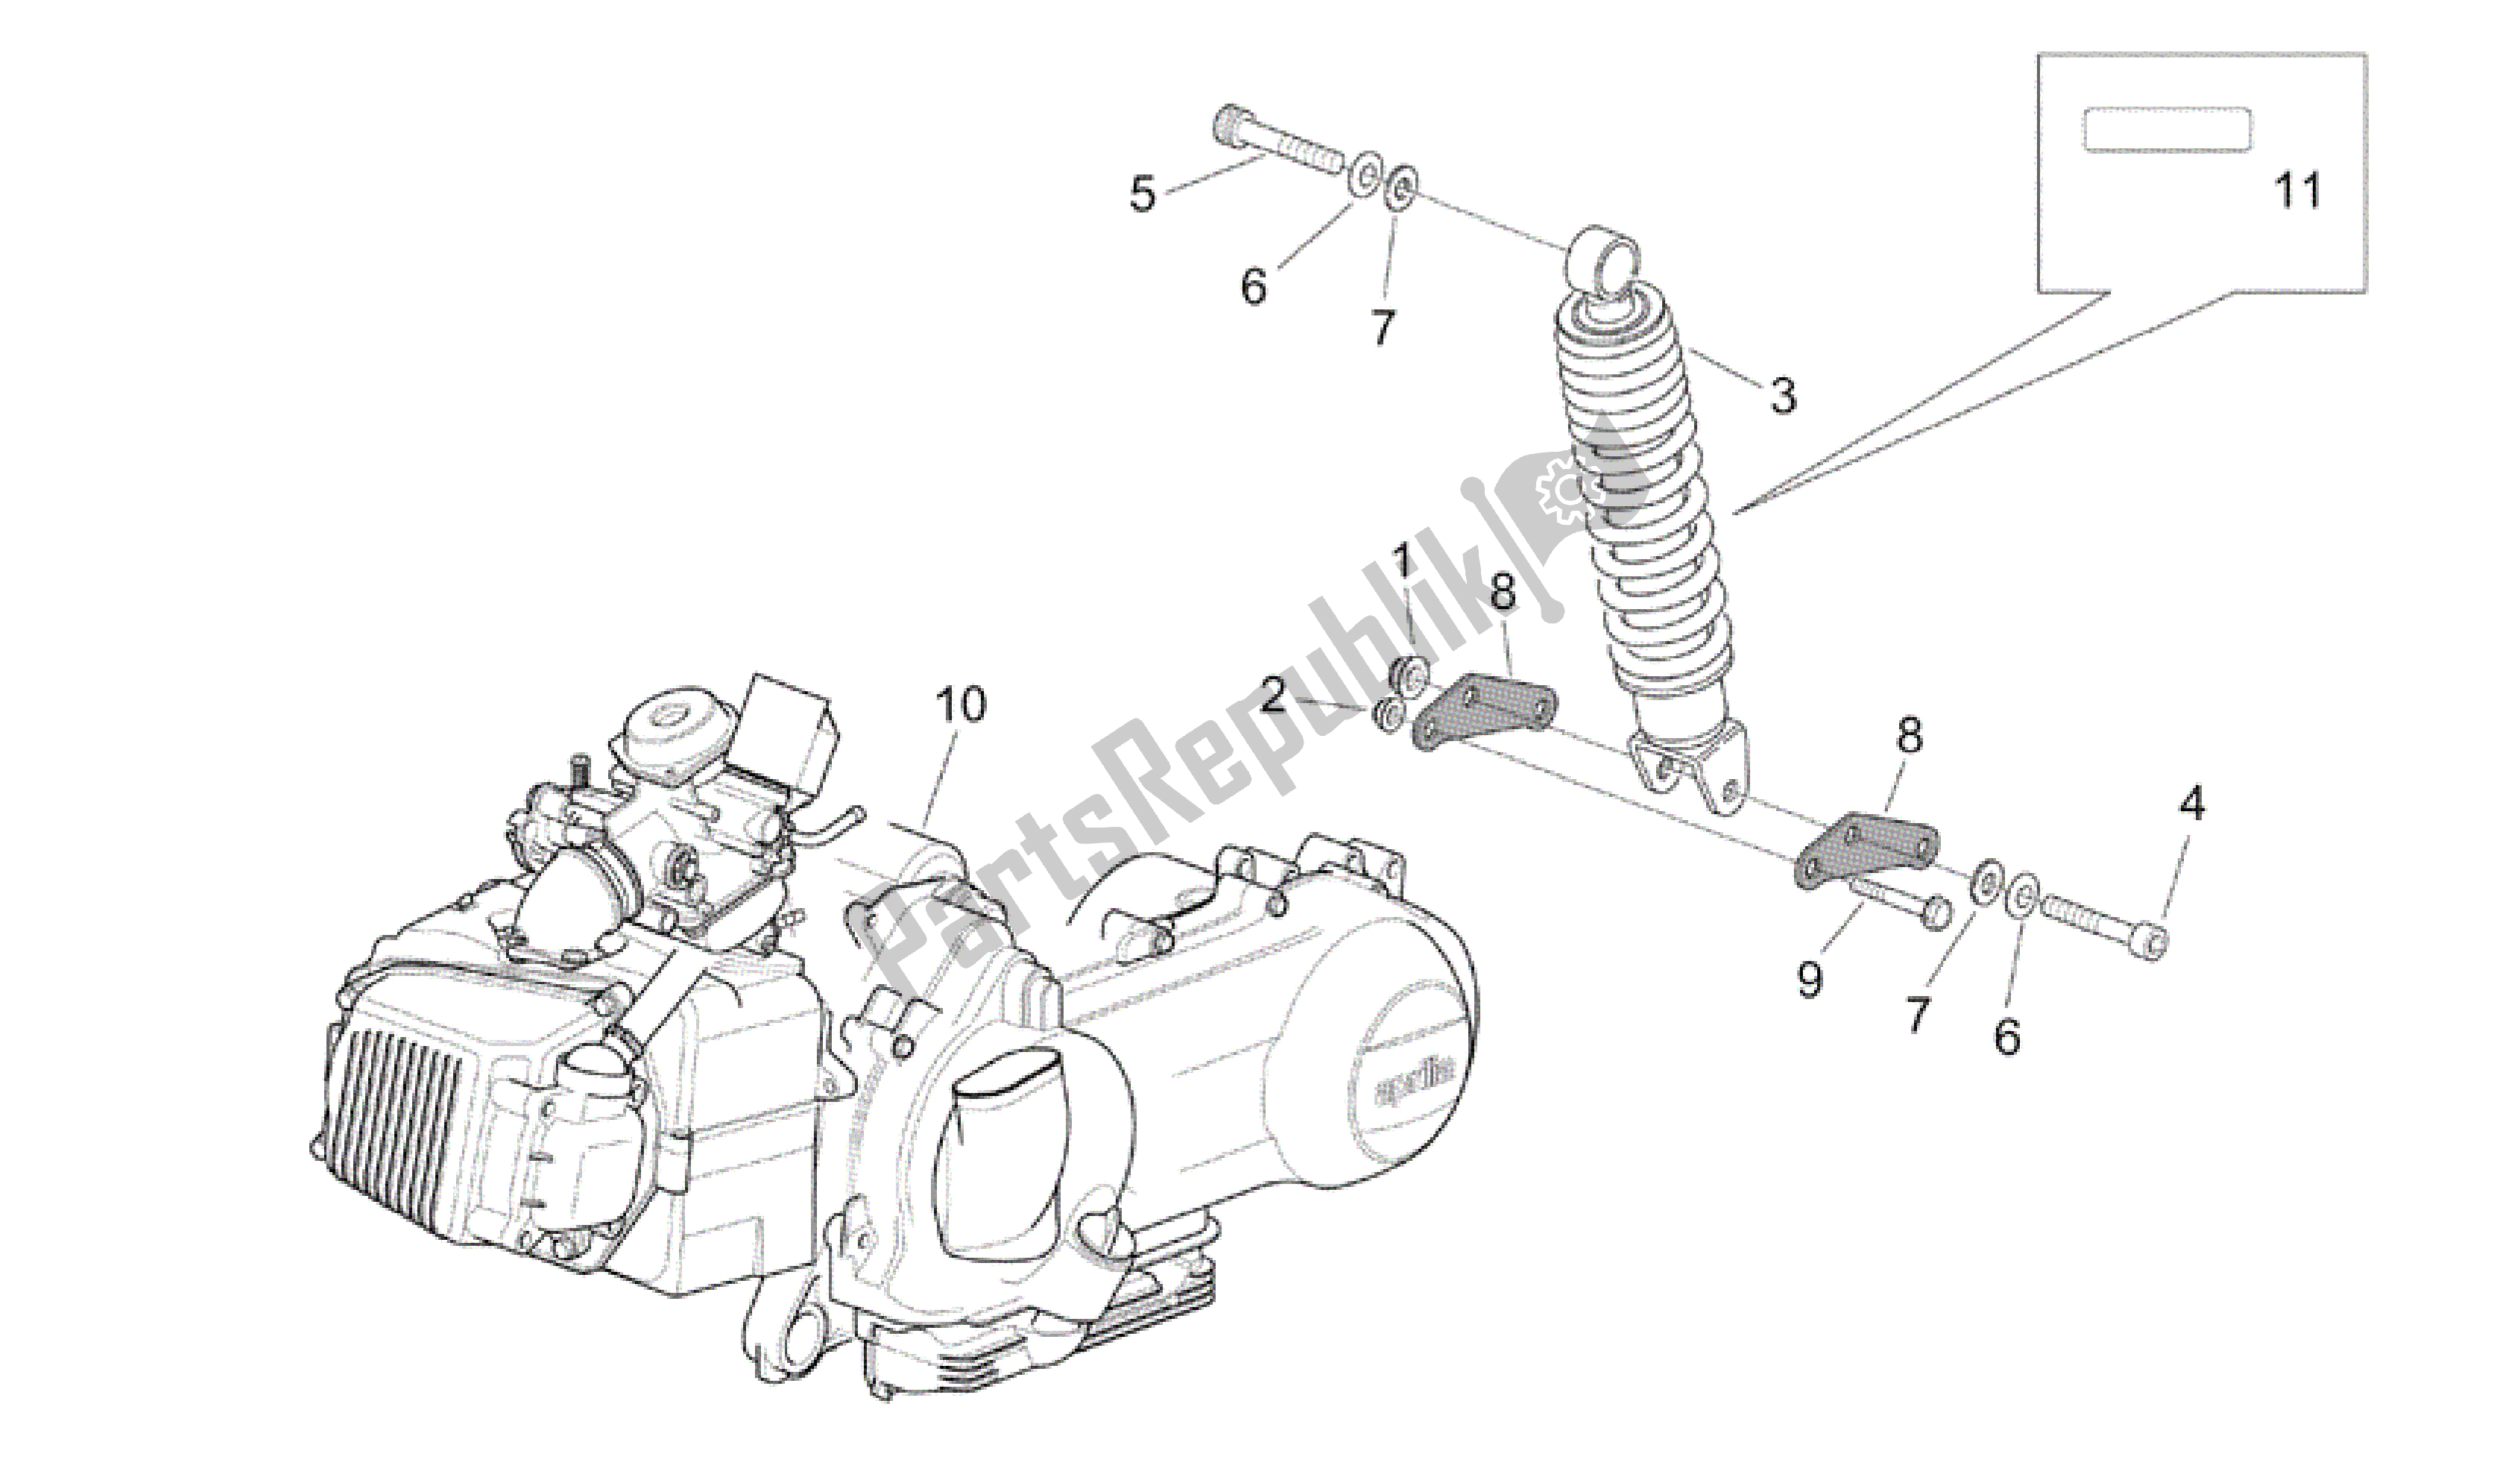 All parts for the Engine - Rear Shock Absorber of the Aprilia Mojito 125 2003 - 2007